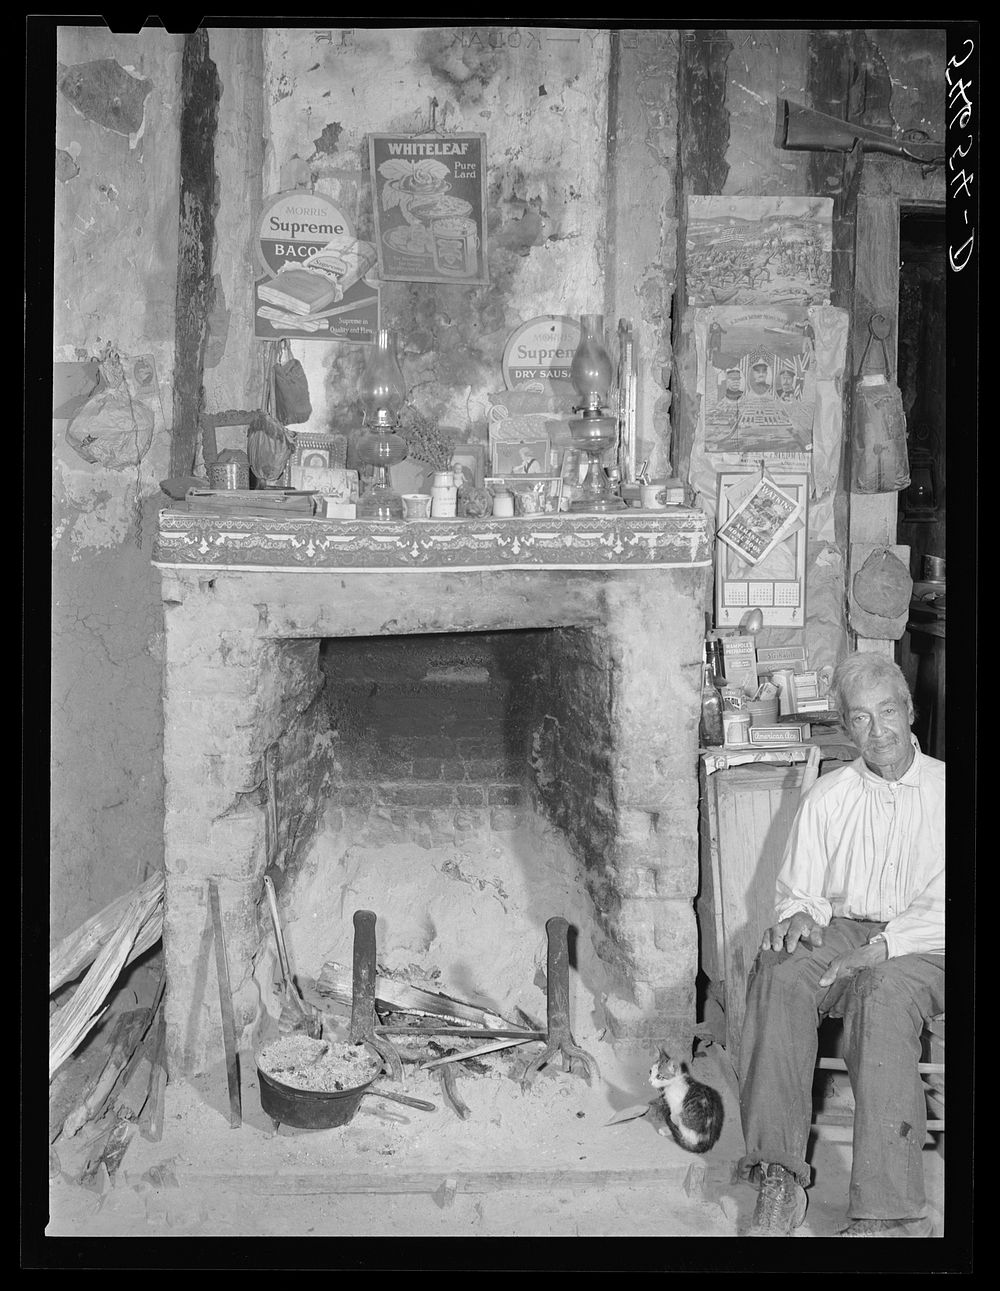 Melrose, Natchitoches Parish, Louisiana. Fireplace in old mud hut built and still lived in by French mulattoes near John…